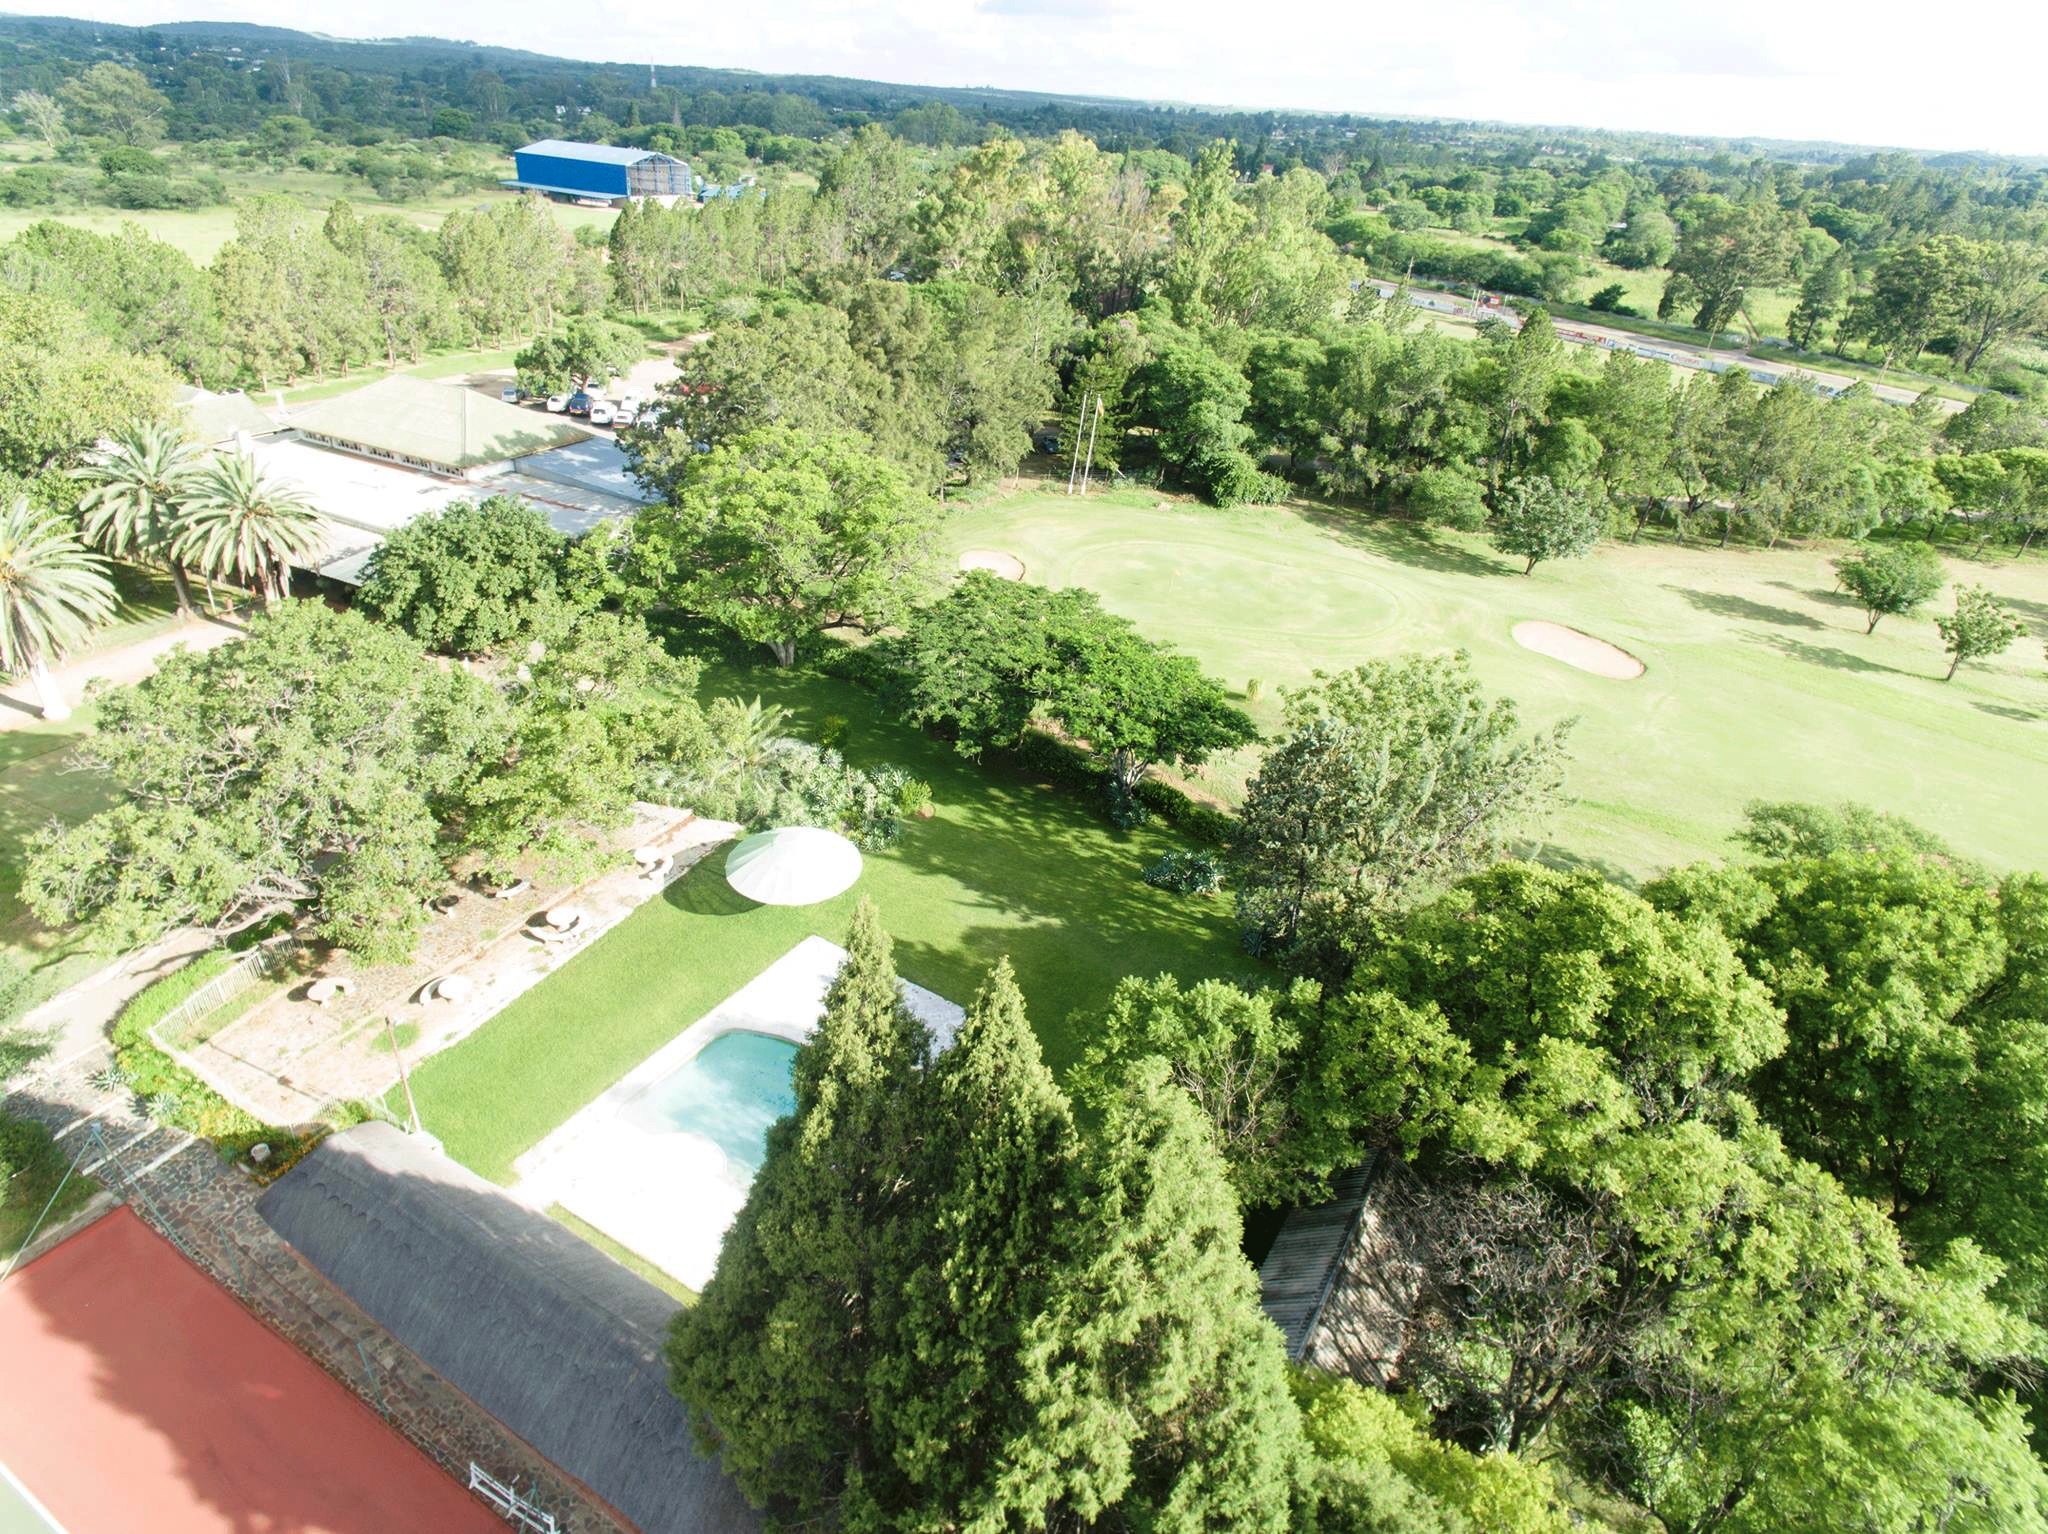 cl_golf_bcc_18_drone_pool